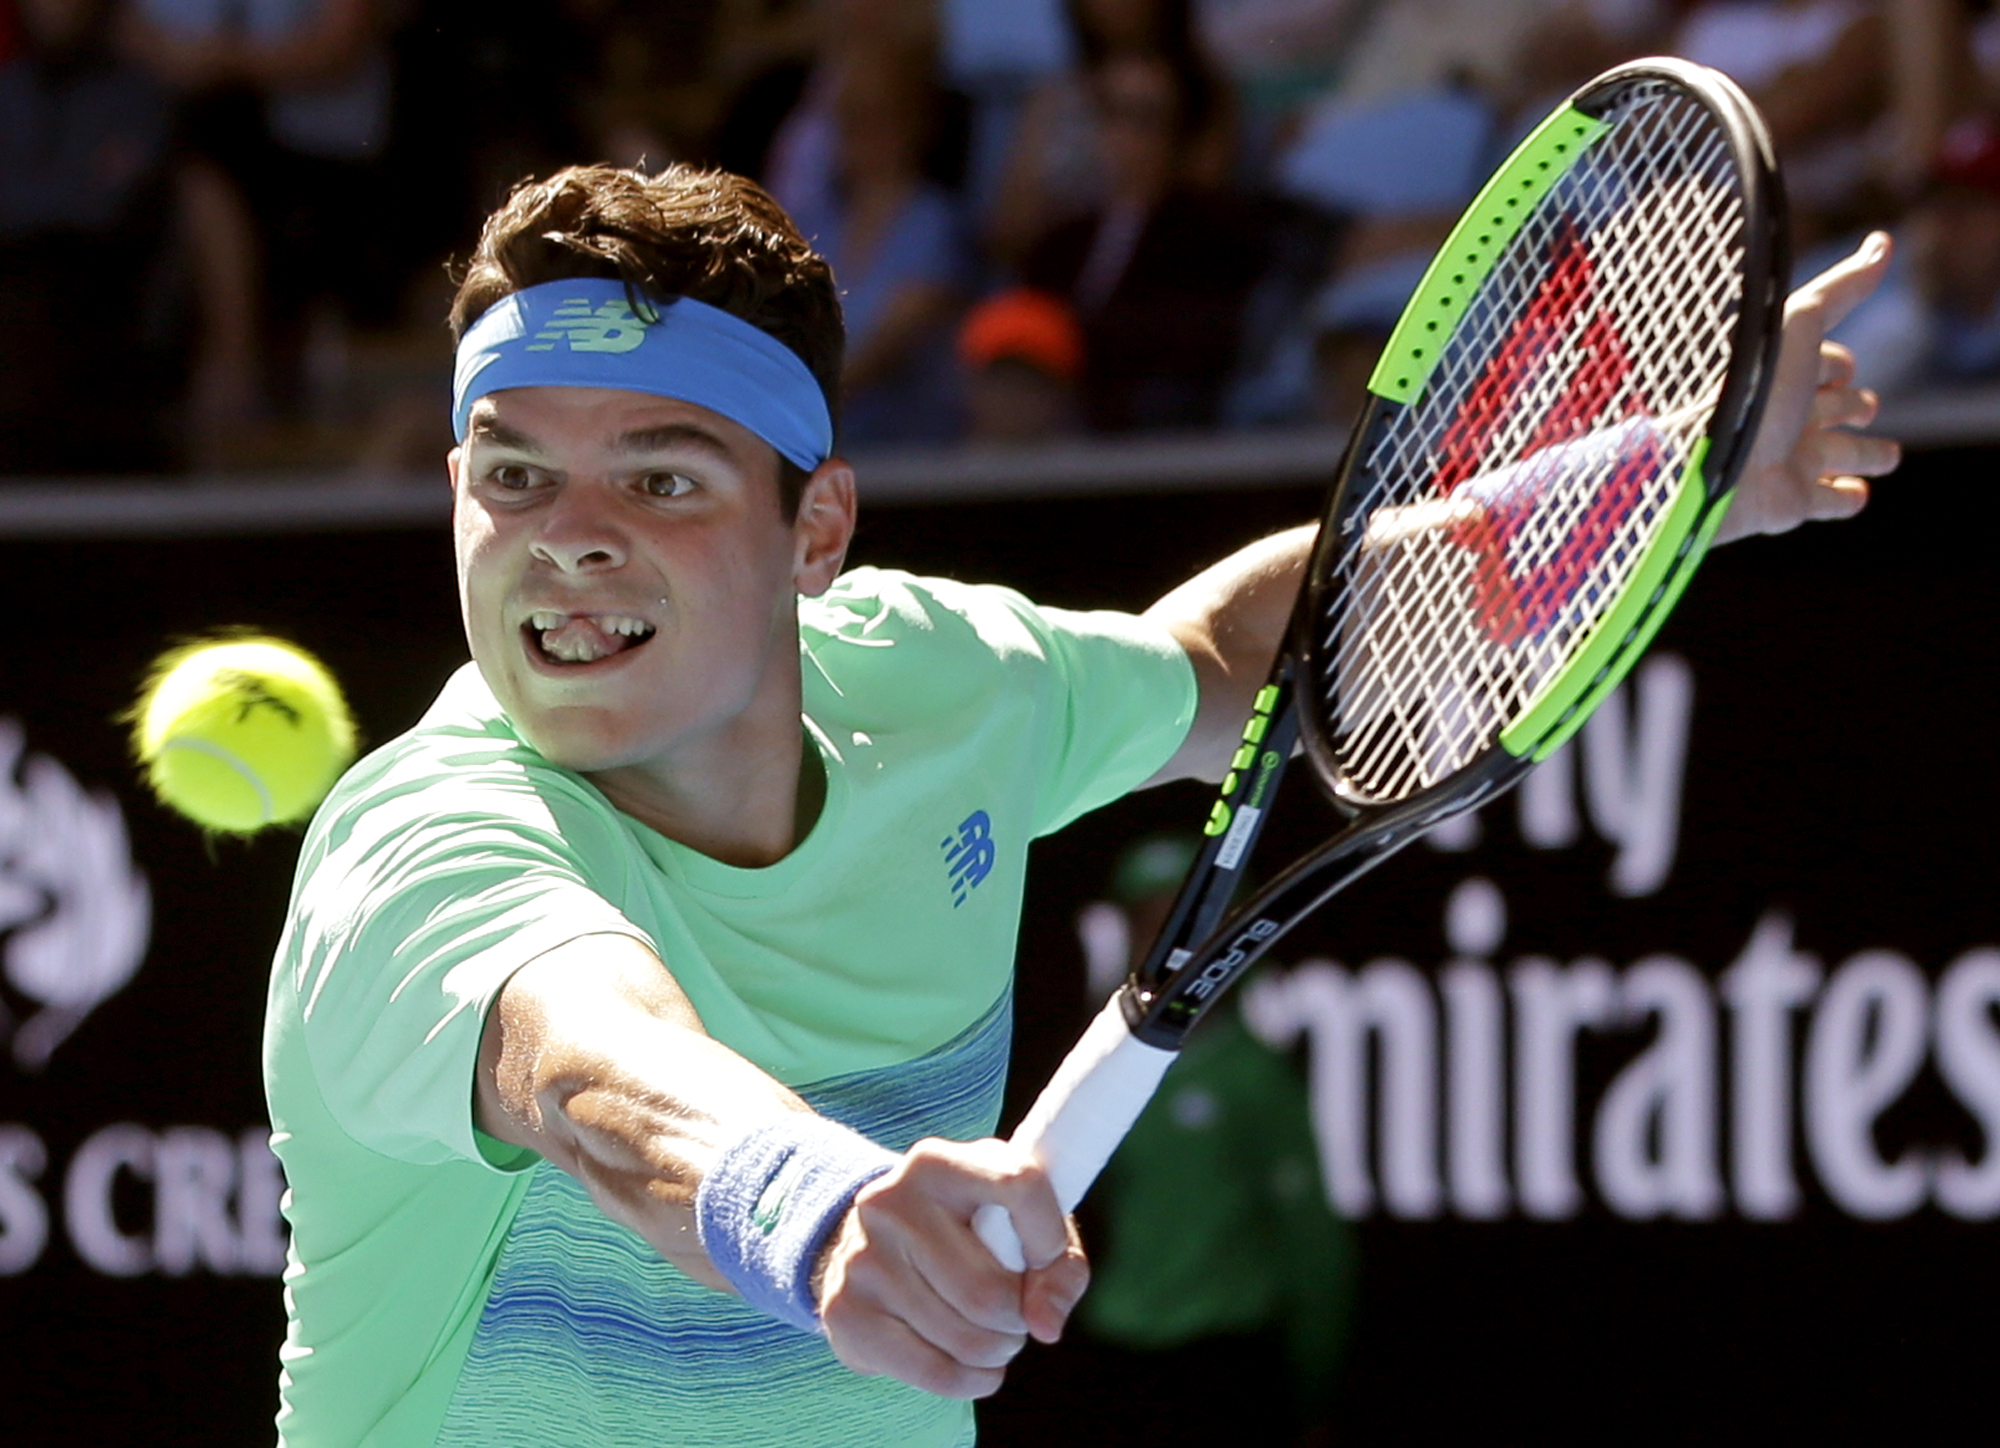 Canada's Milos Raonic makes a backhand return to Luxembourg's Gilles Muller during their second round match at the Australian Open tennis championships in Melbourne, Australia, Thursday, Jan. 19, 2017. (AP Photo/Aaron Favila)